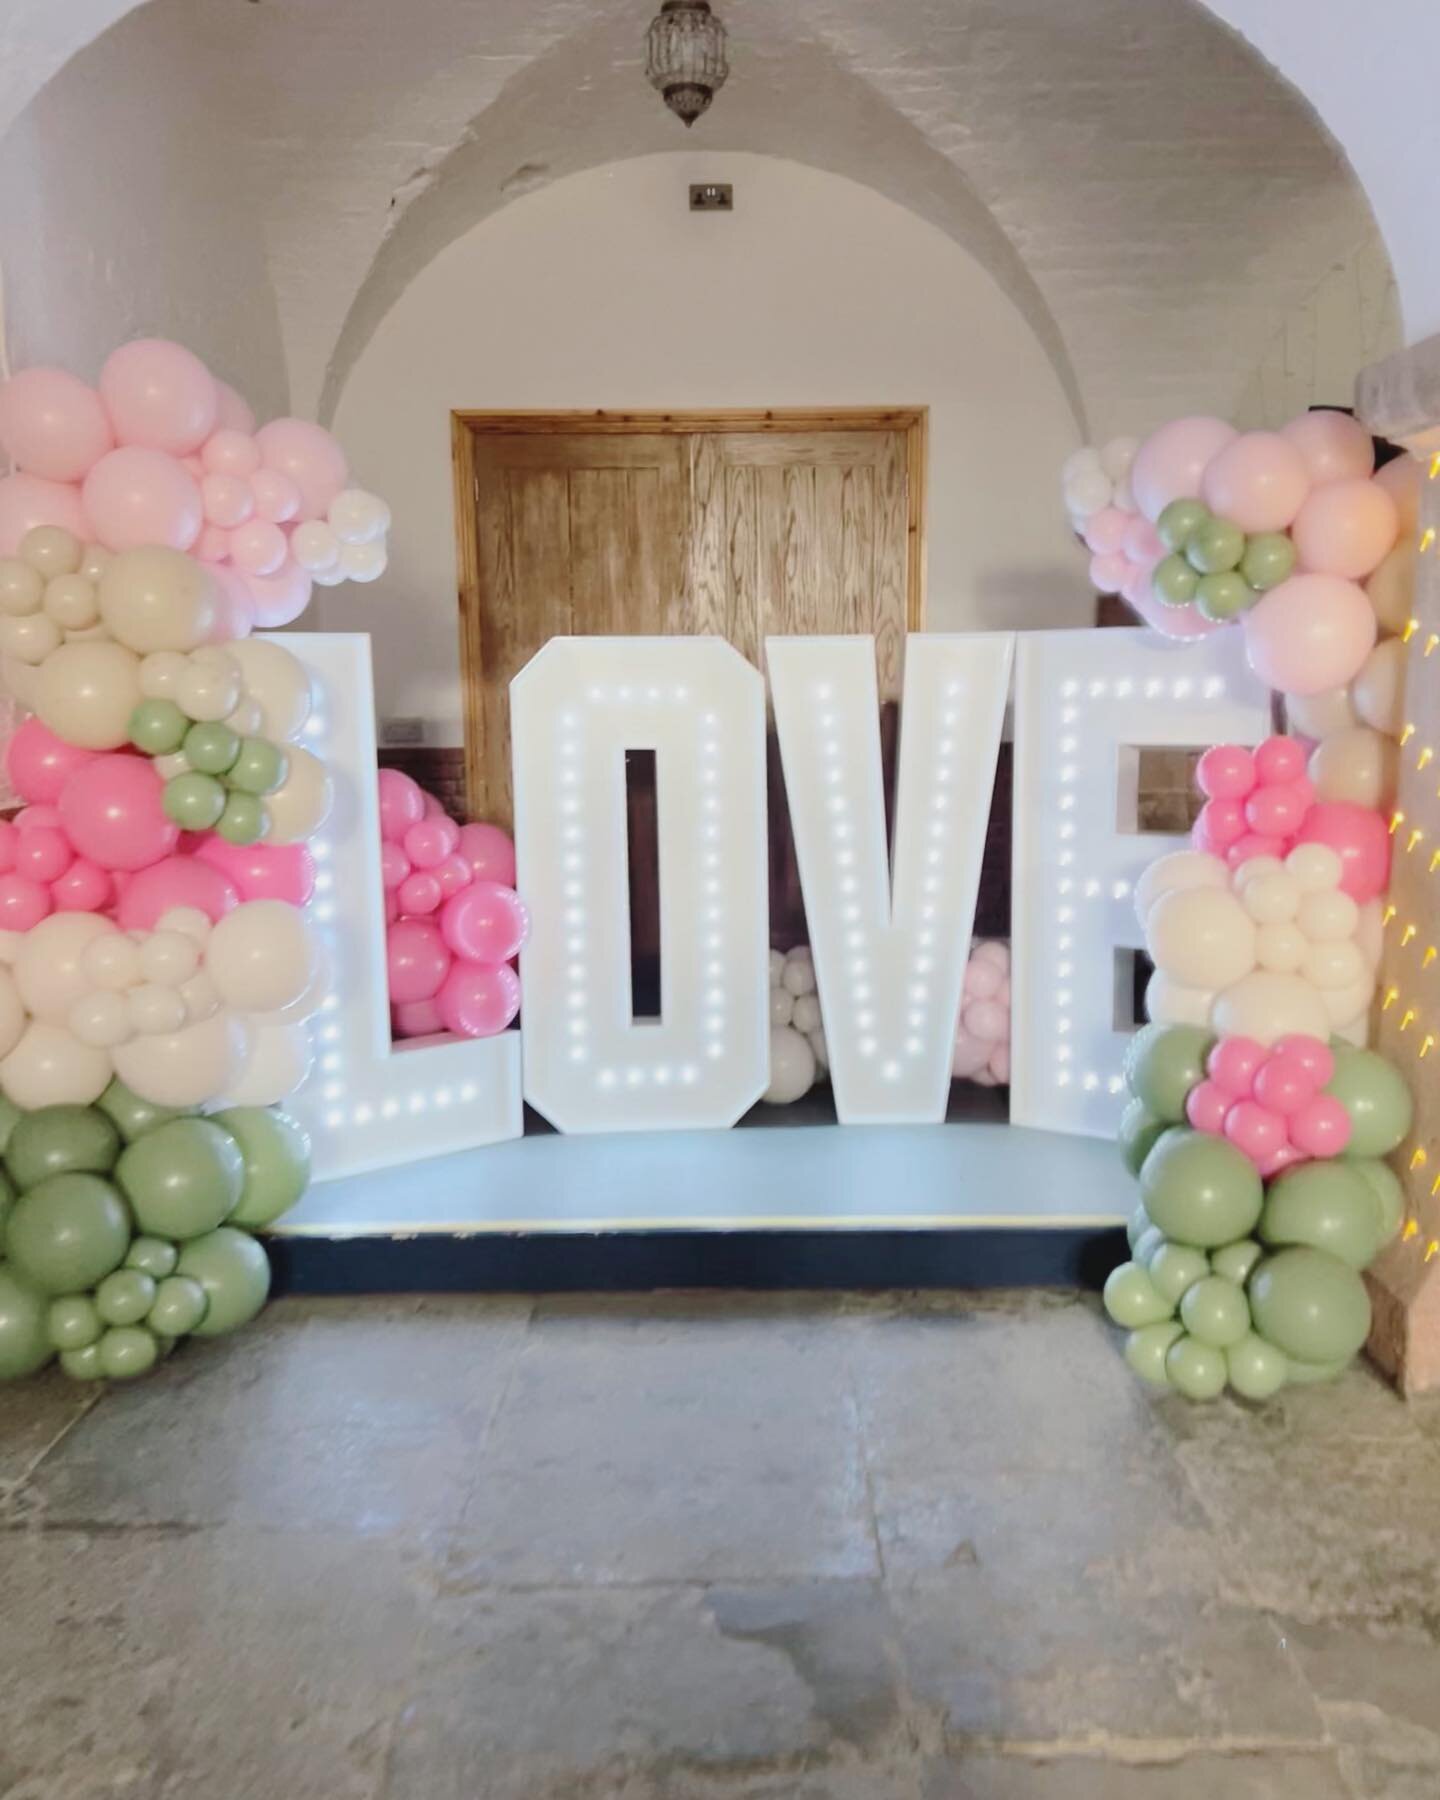 All you need is love. Our balloons framing @creative collections rather lovely LOVE letters @crowcombecourt

Venue: @crowcombecourt 
Styling: Creative Collections